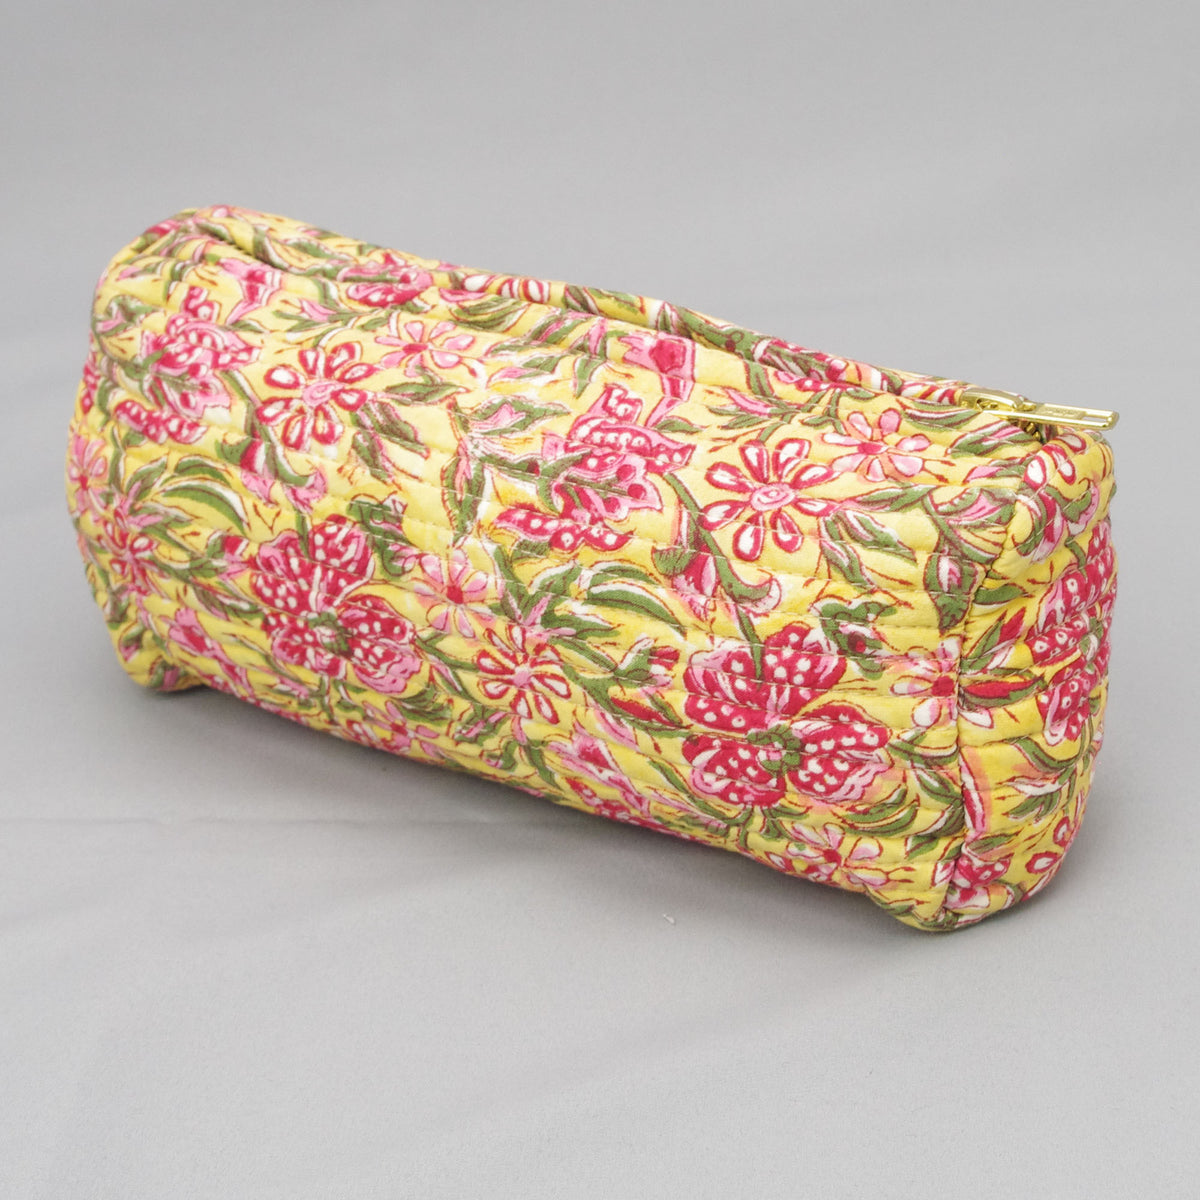 Block Print Makeup Pouch or Pencil Case - Pink Yellow Floral